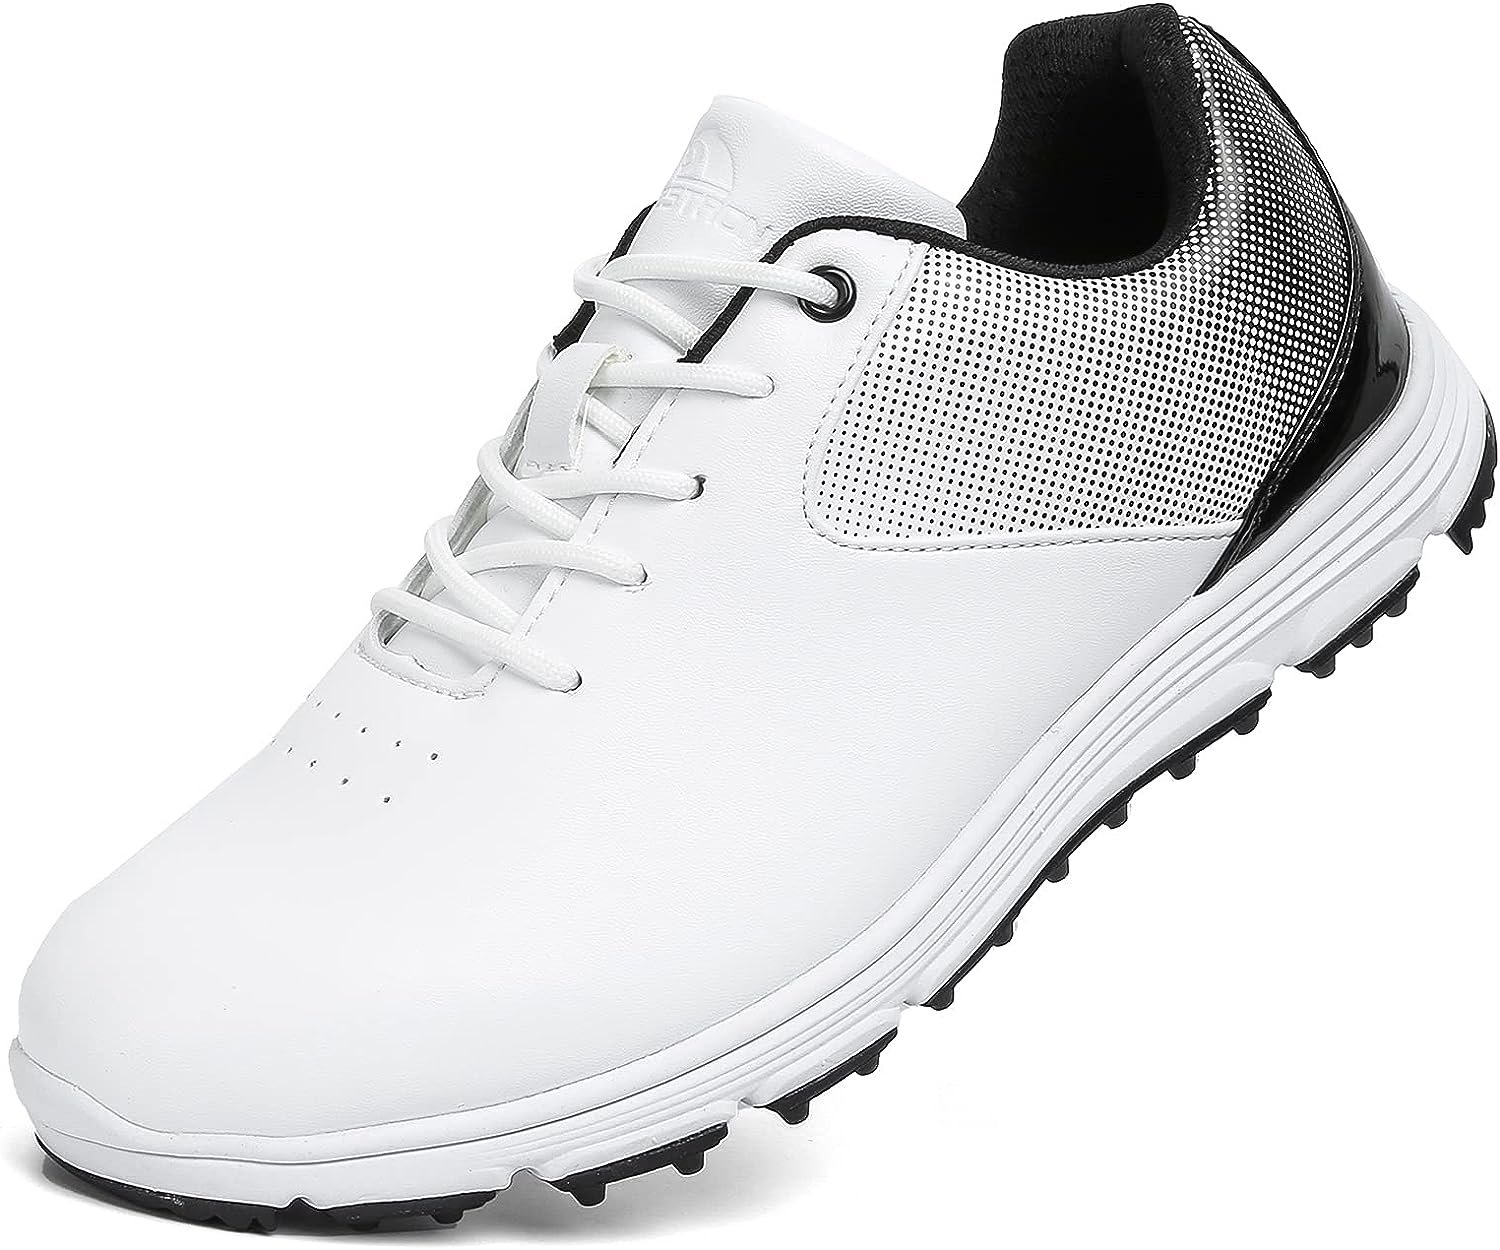 Waterproof Golf Shoes for Men Spikeless Outdoor Golf Sport Training Sneakers Classic Mens Golf Trainers Size 13 14 …